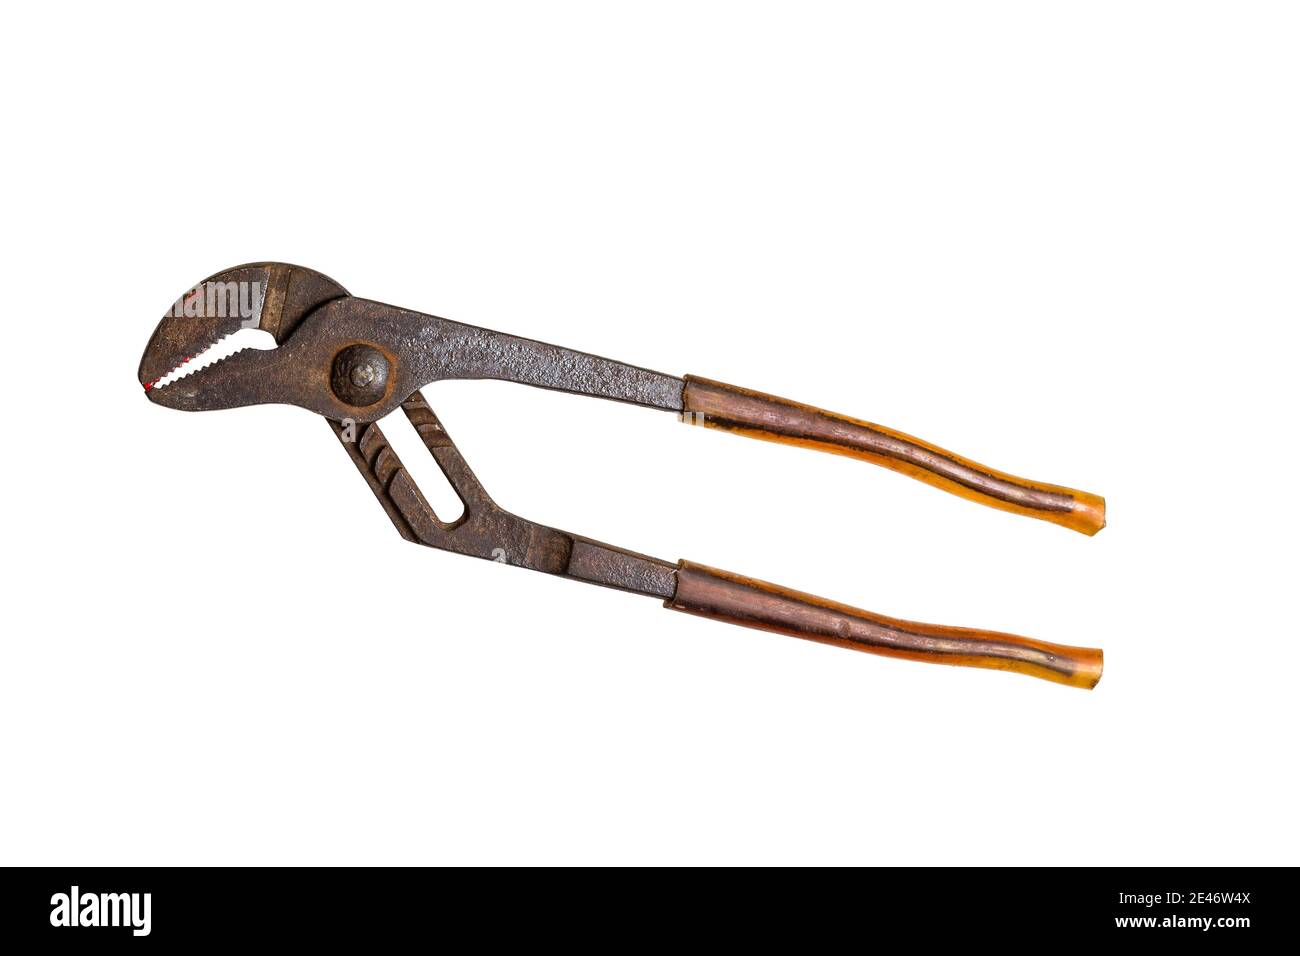 https://c8.alamy.com/comp/2E46W4X/antique-tongue-and-groove-plier-on-a-solid-white-background-2E46W4X.jpg